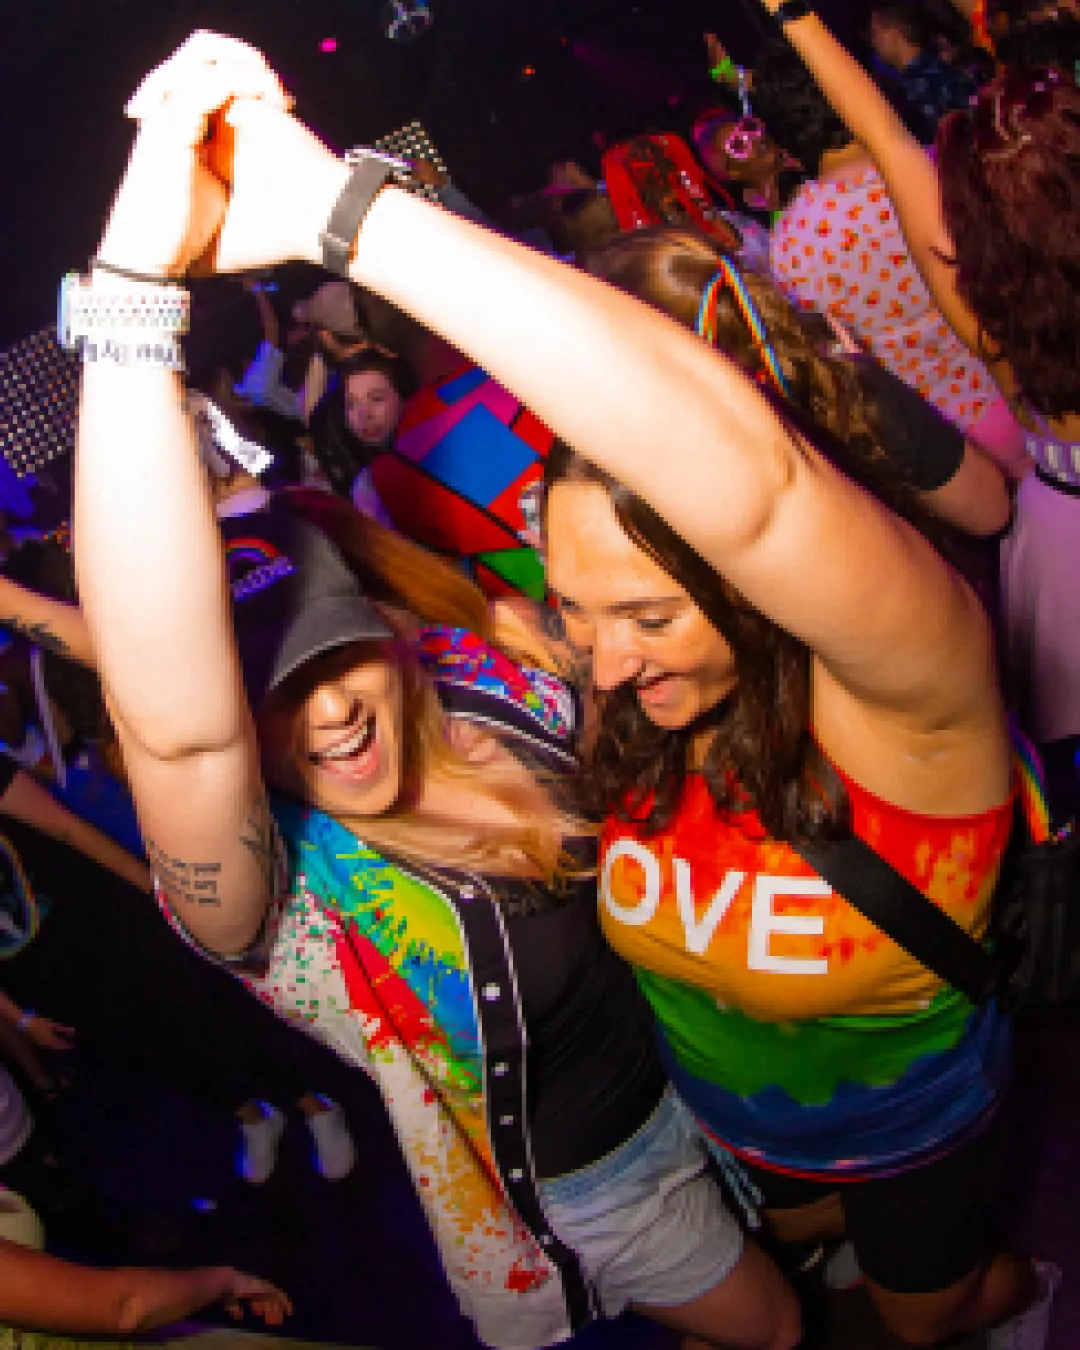 2 lovebirds showing their energy dancing together having a blast at the Pride Bar Crawl